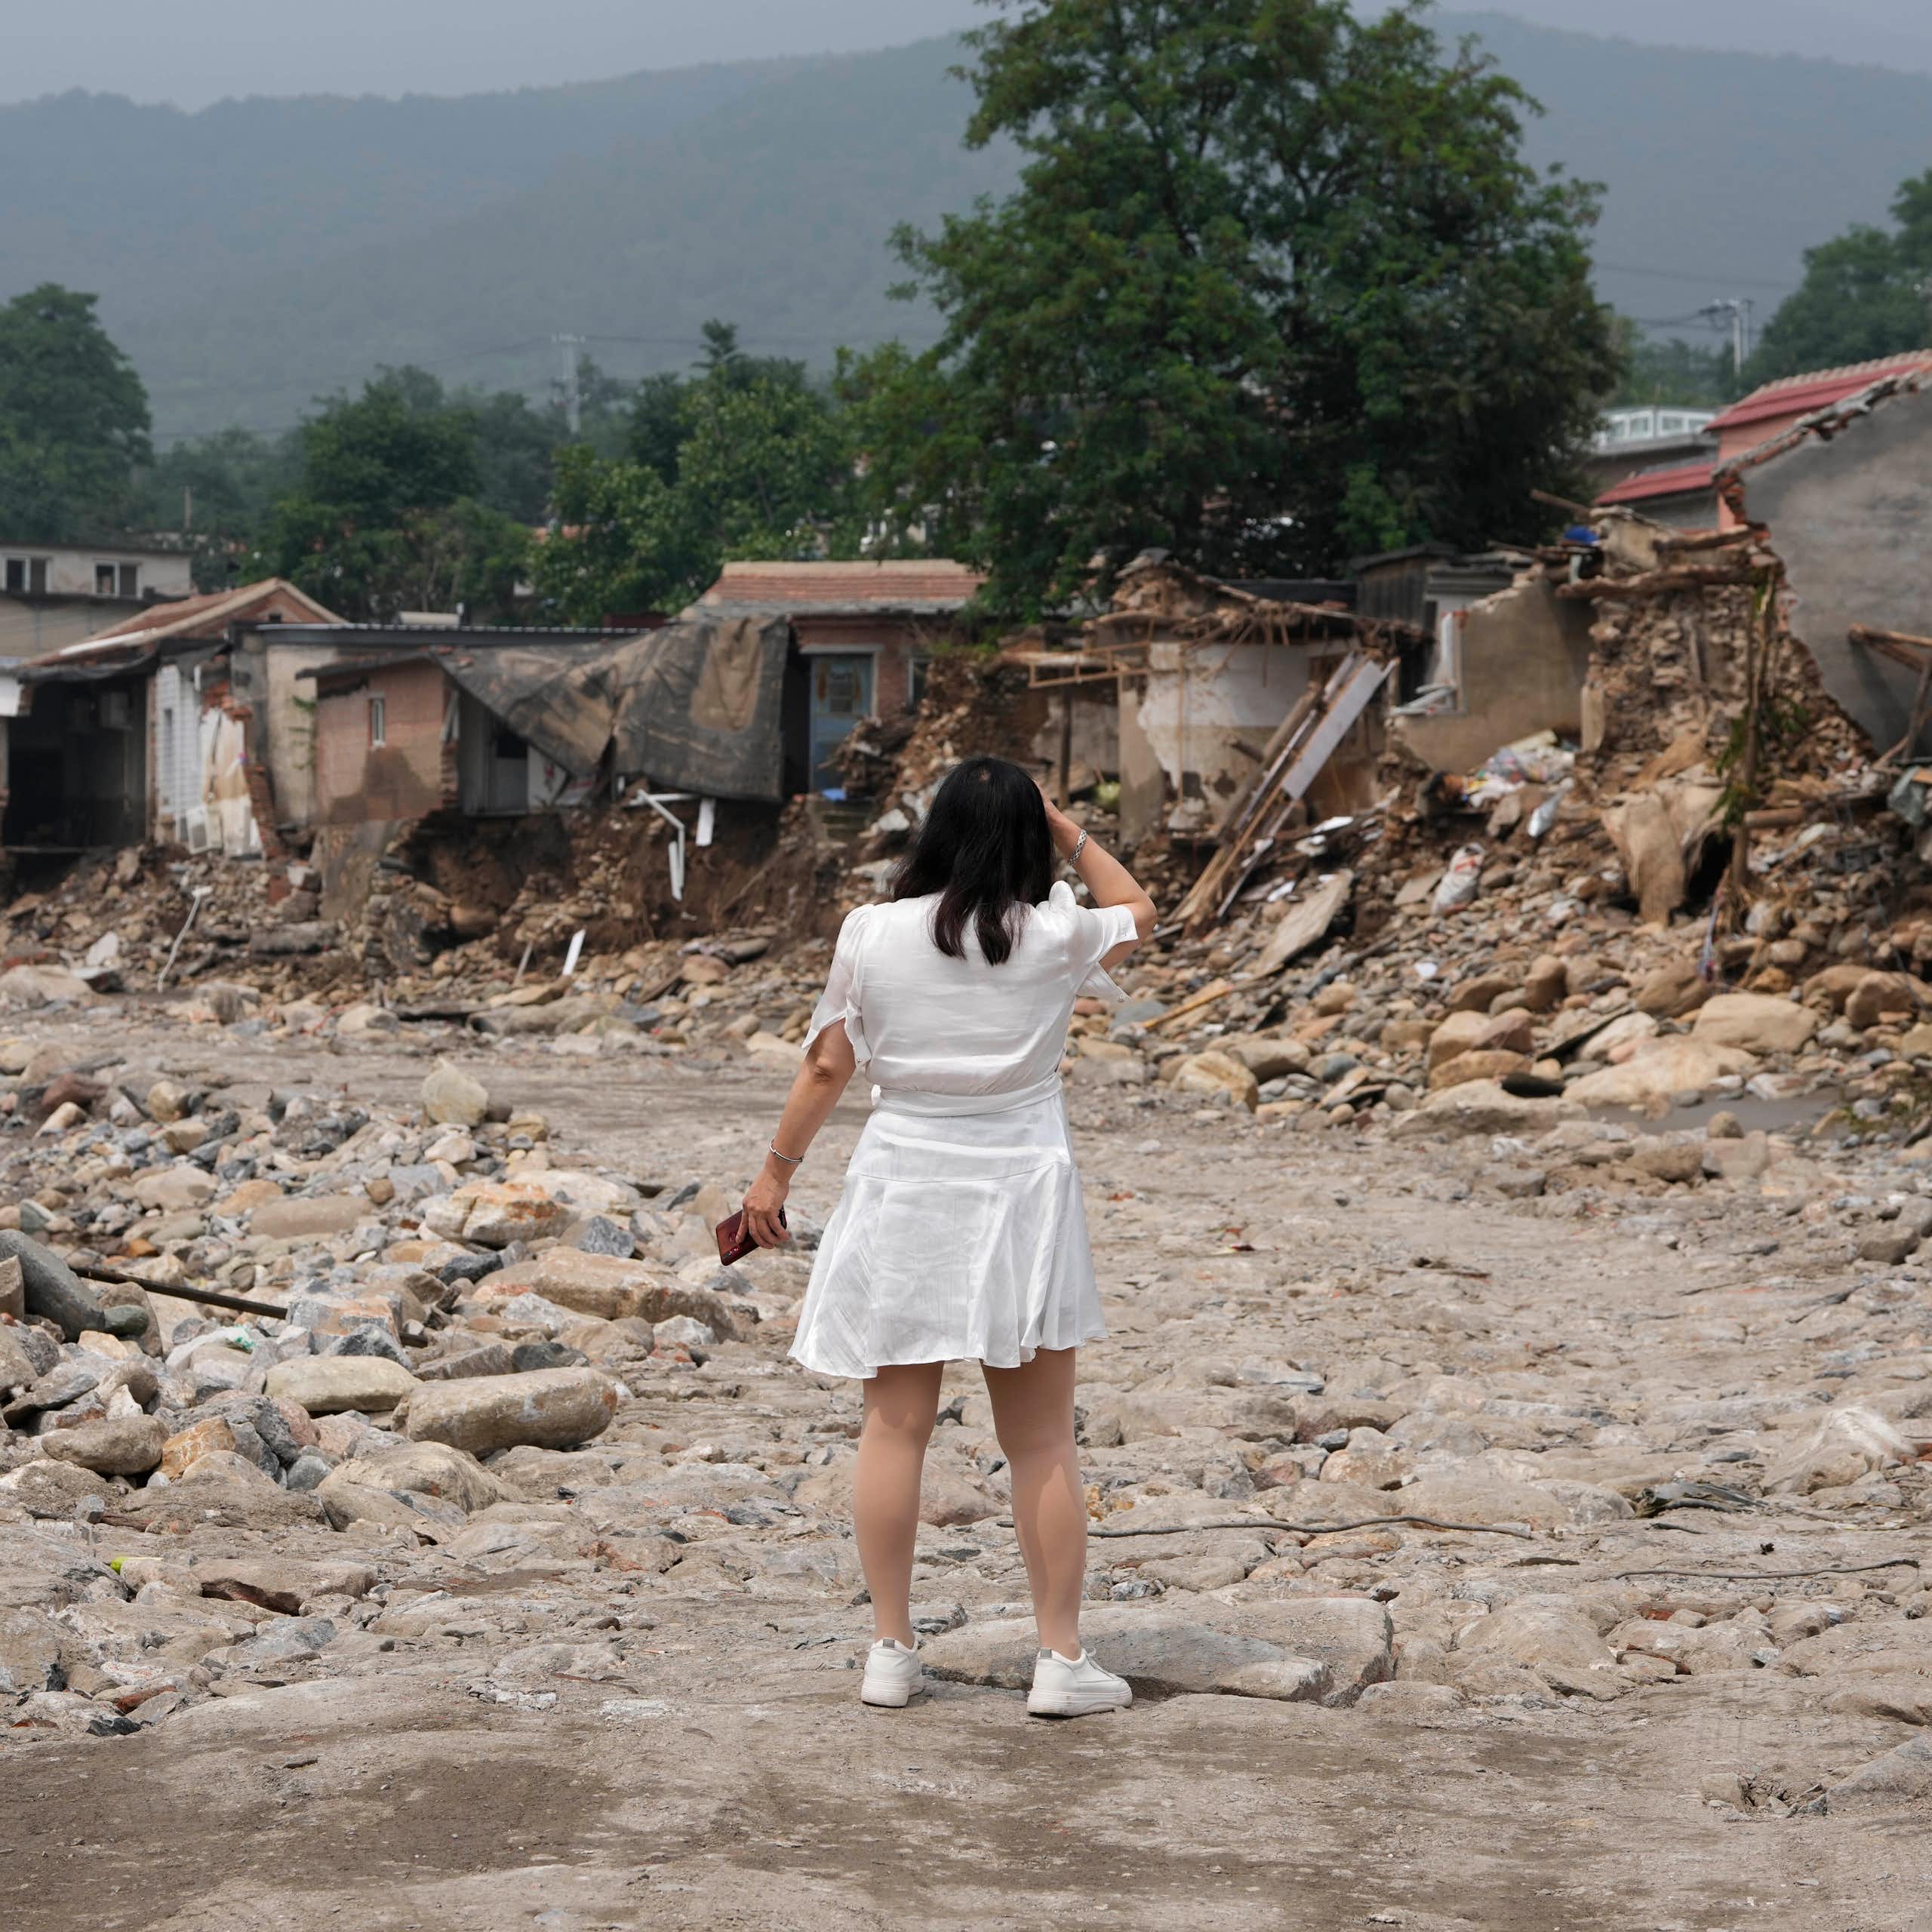 A woman in a white dress with her back to the camera stands in front of the wreckage of a row of houses